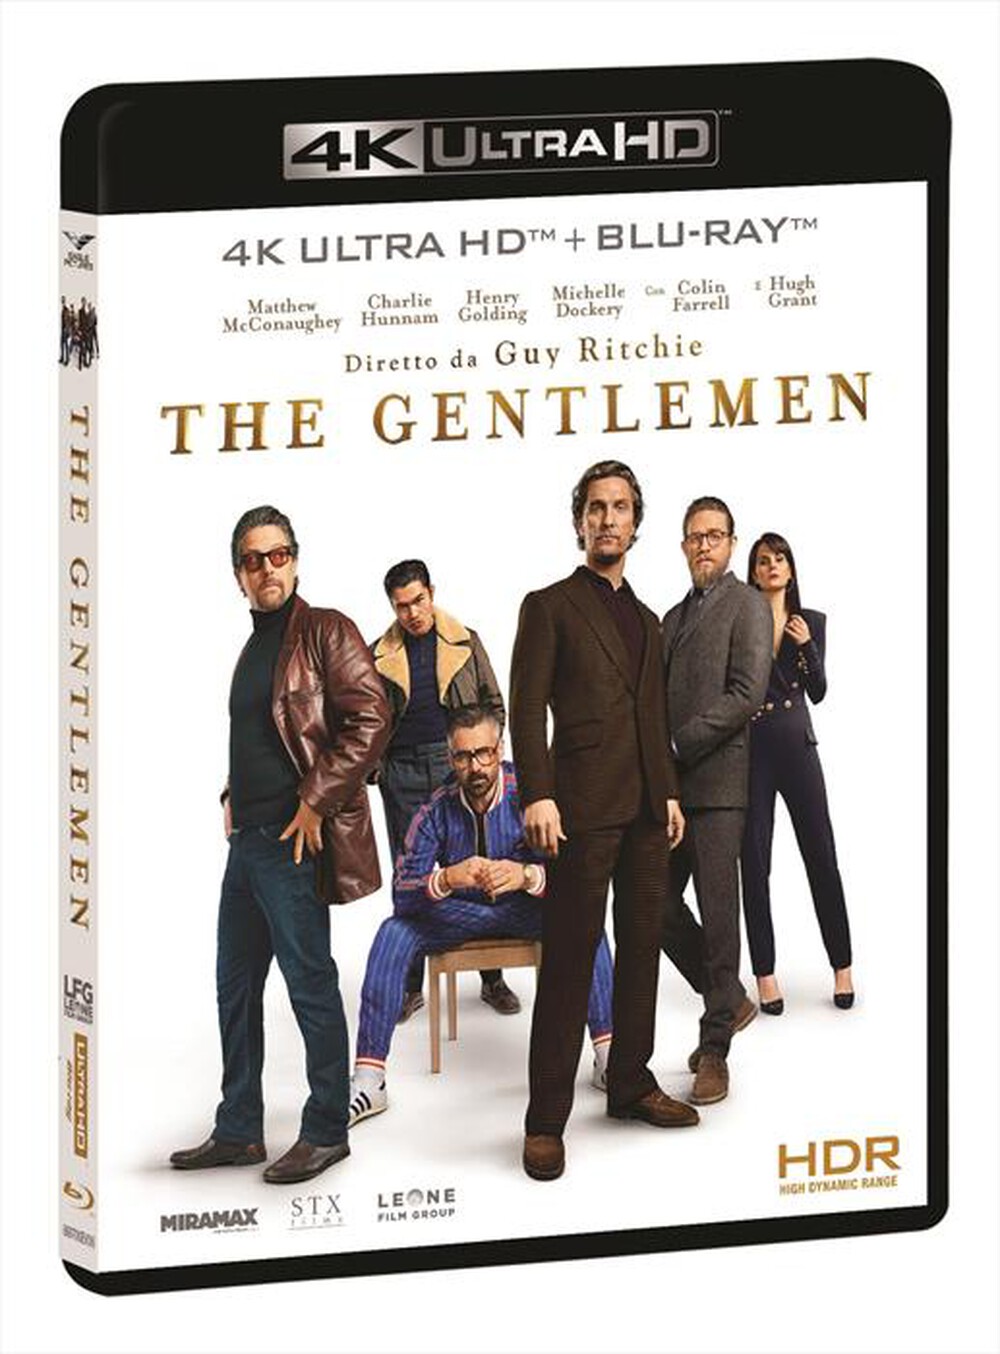 "EAGLE PICTURES - Gentlemen (The) (4K Ultra Hd+Blu-Ray)"